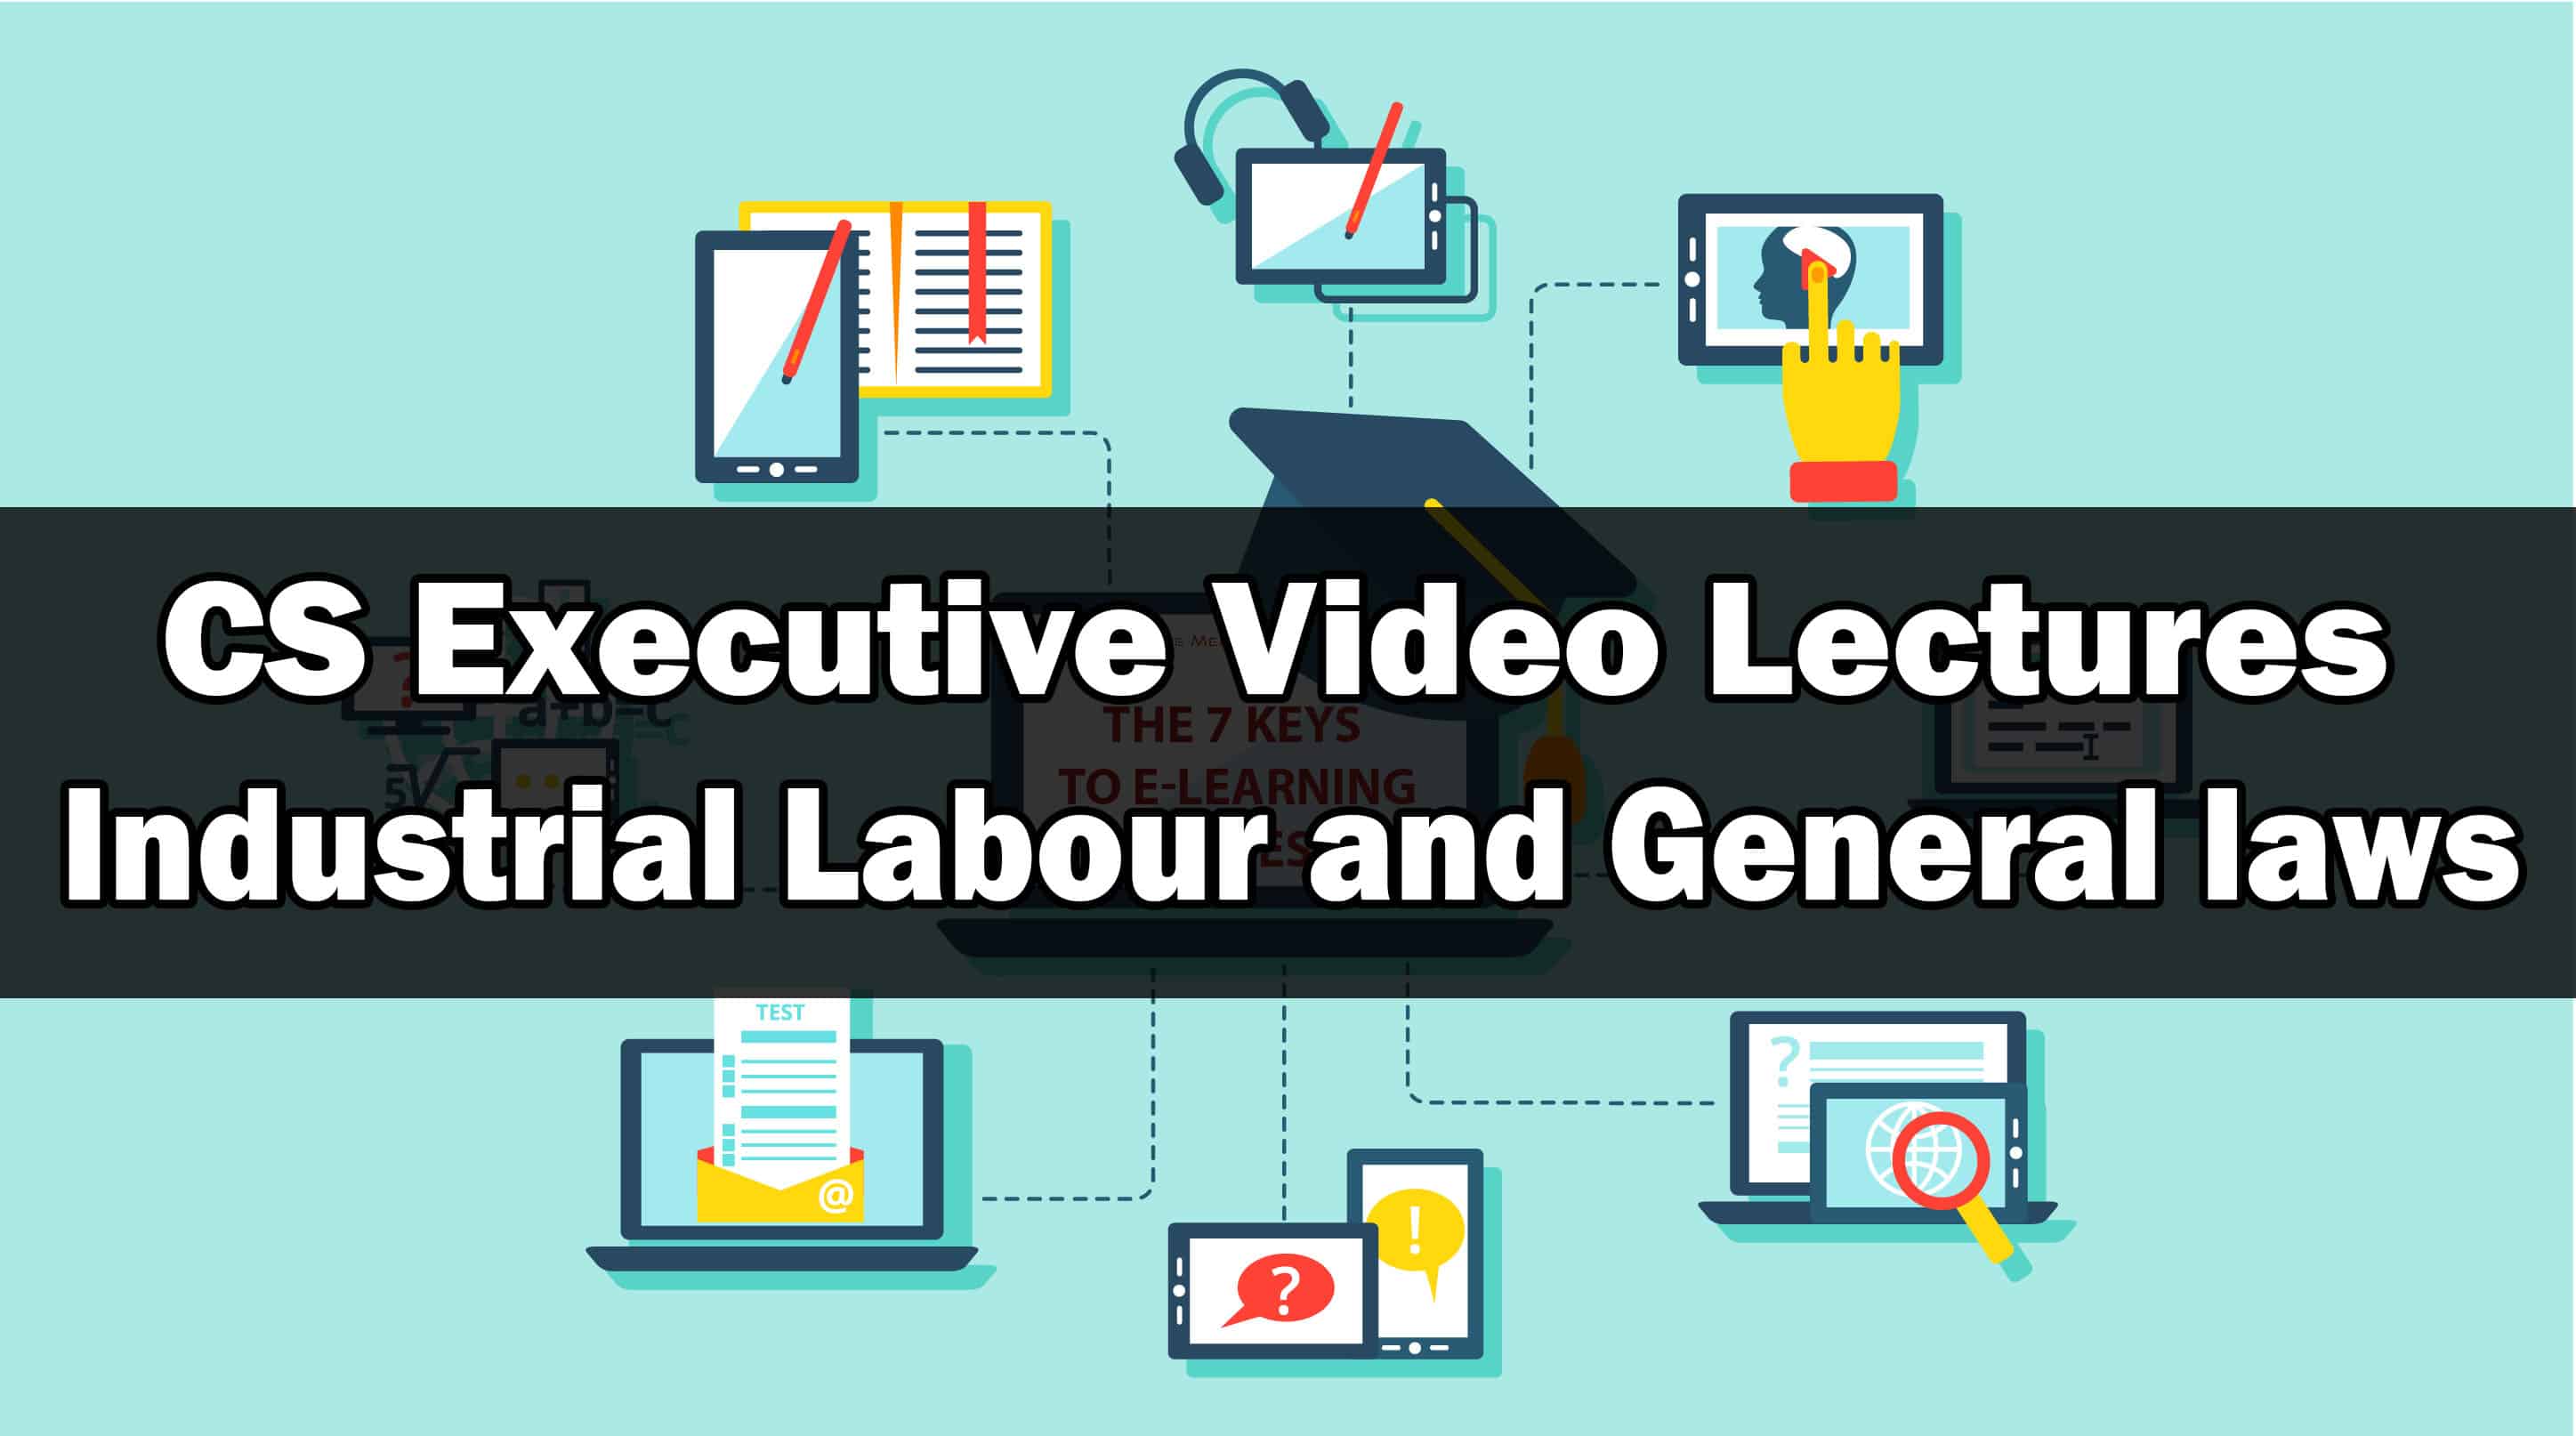 CS Executive Industrial Labour General Law Video Lectures